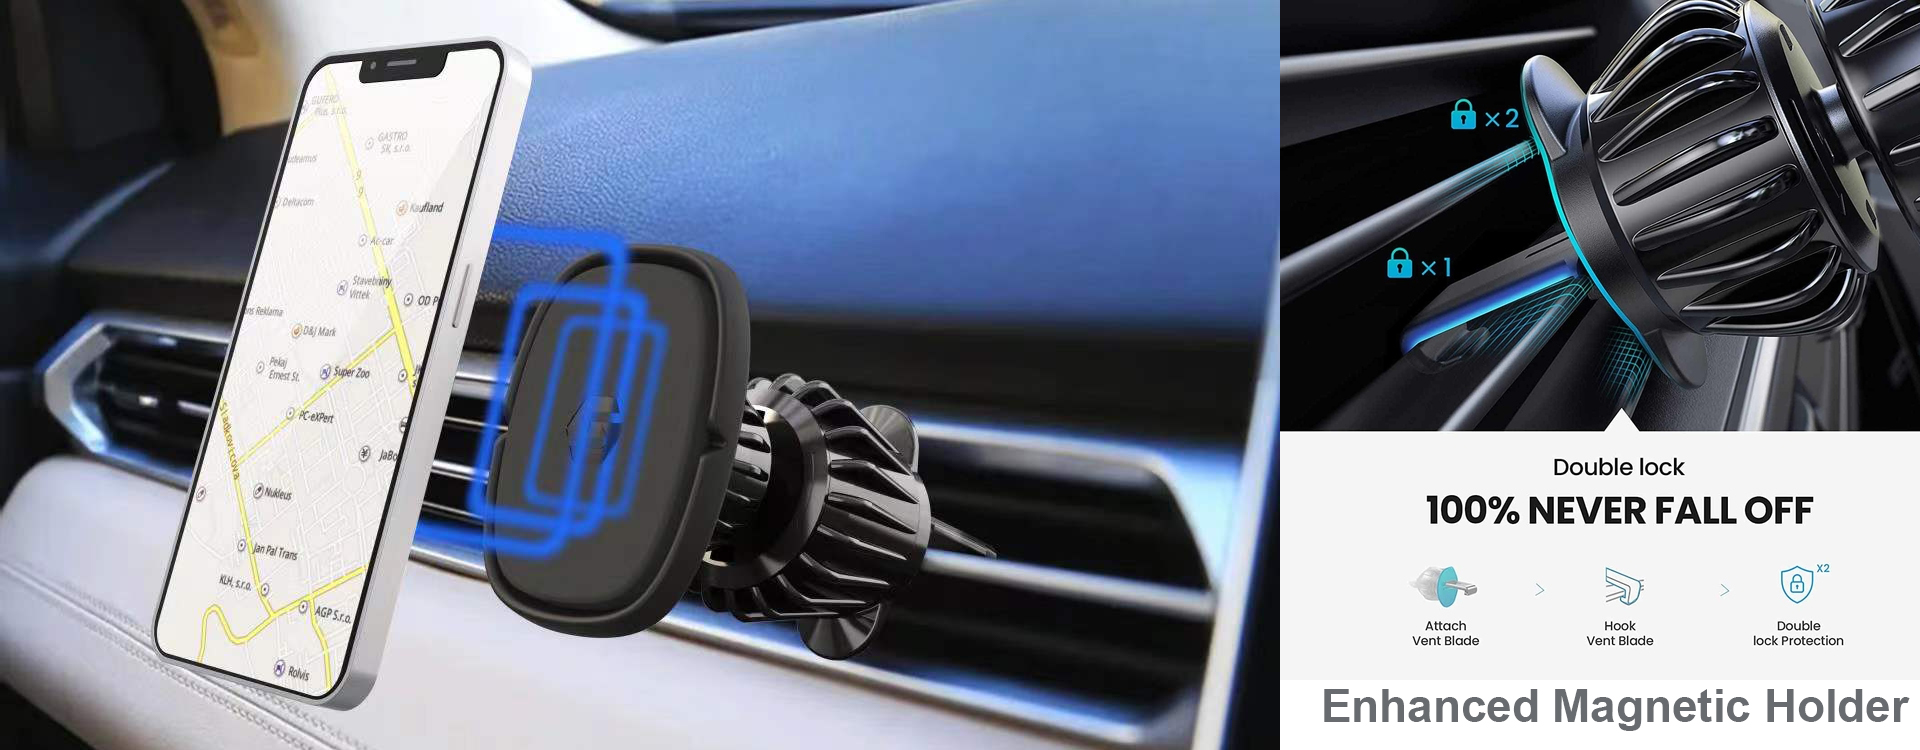 Universal Patented Magnetic Car Air Vent Mount